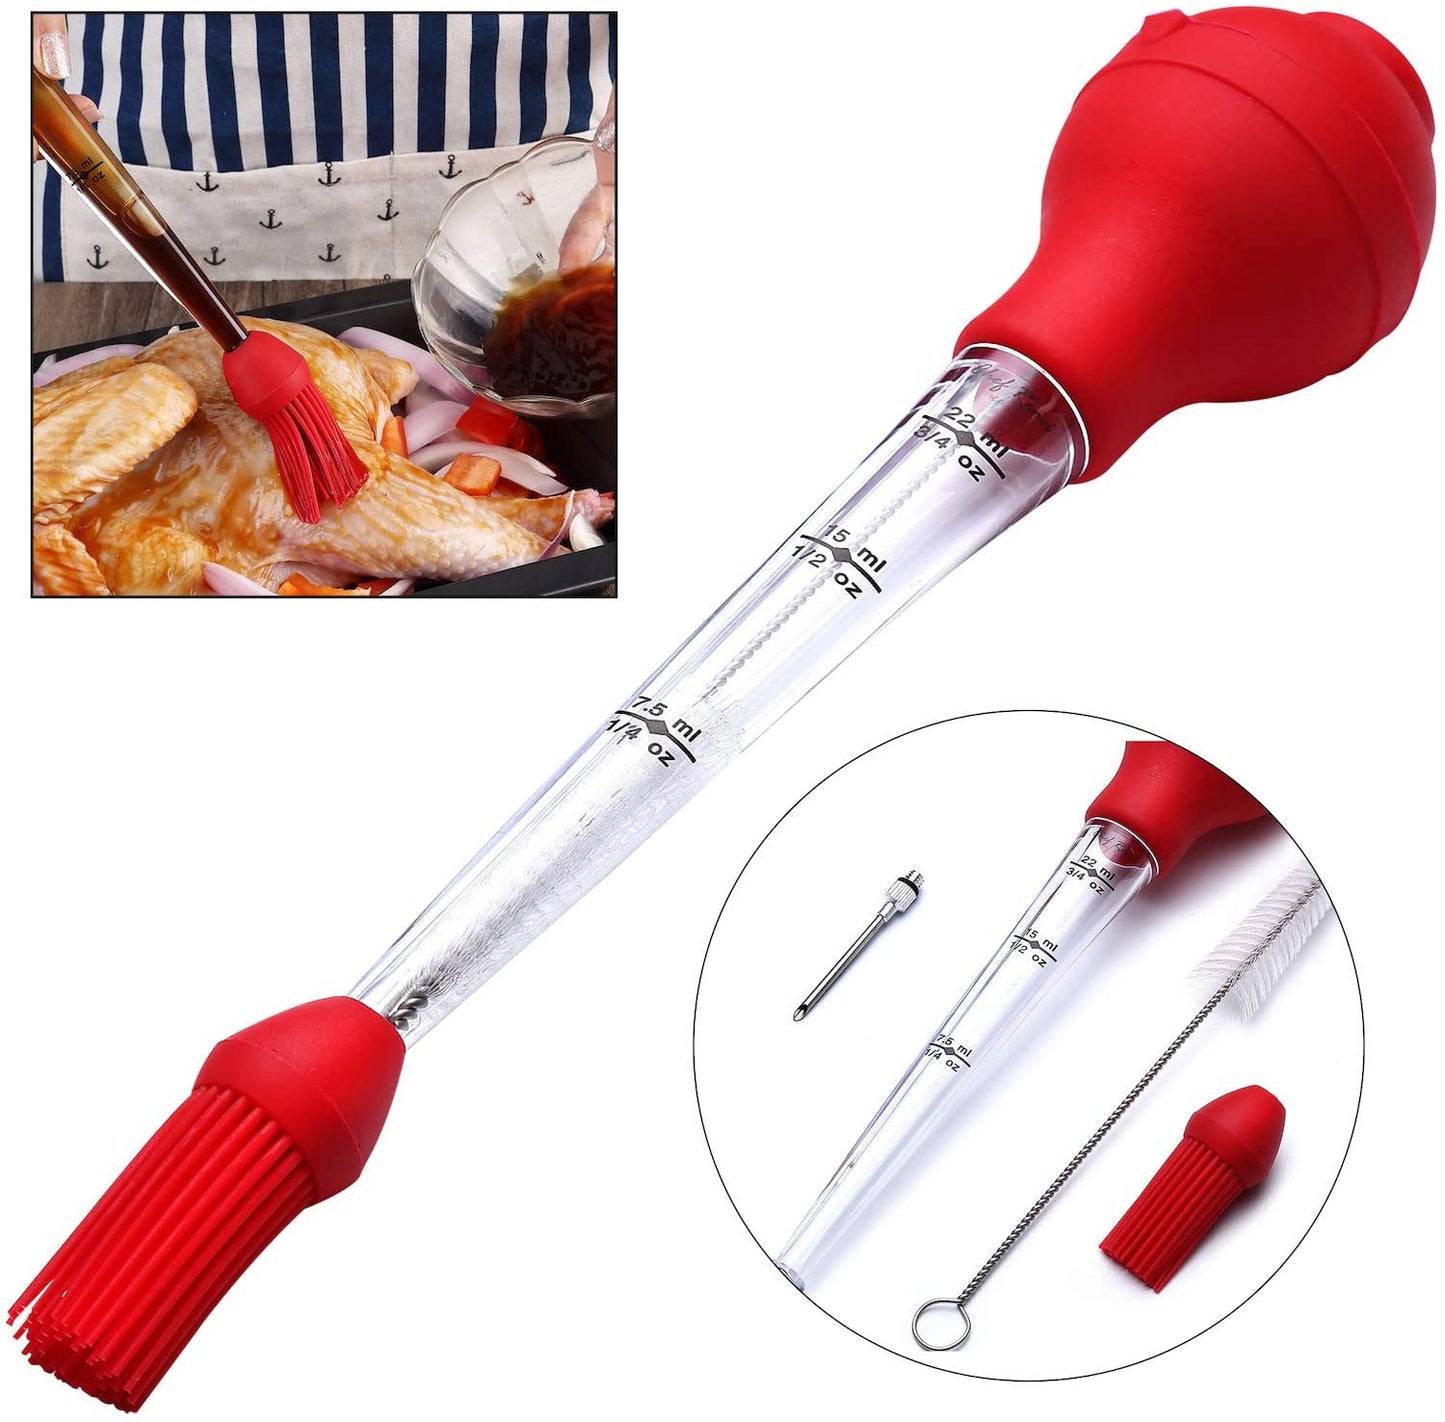 Chef Remi Turkey Baster Kit set of 4, Commercial Grade Quality